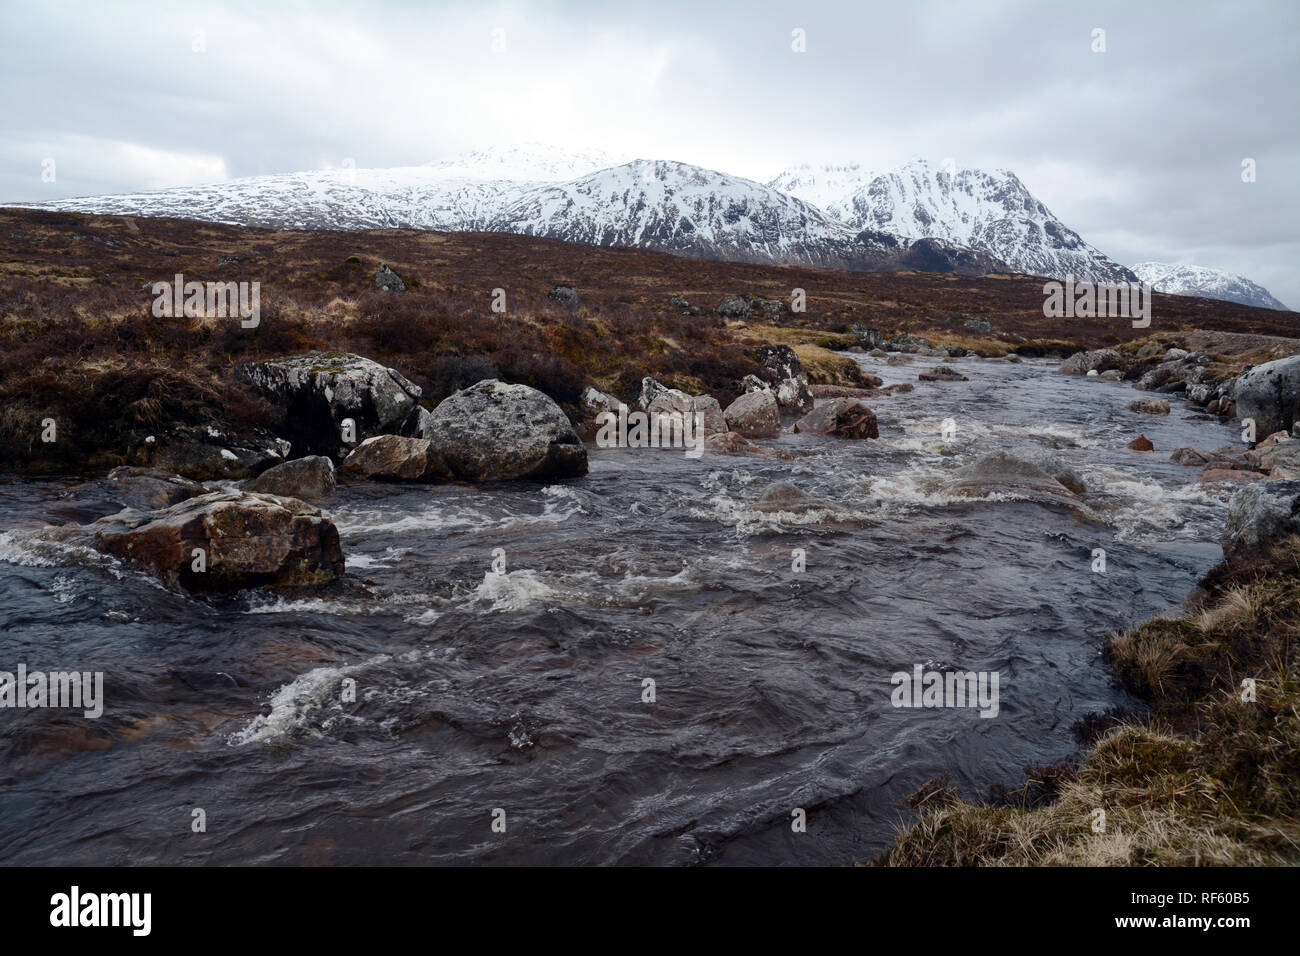 The River Etive with the snowy peaks of the Scottish Highlands in the background, Glencoe region, Scotland, United Kingdom. Stock Photo